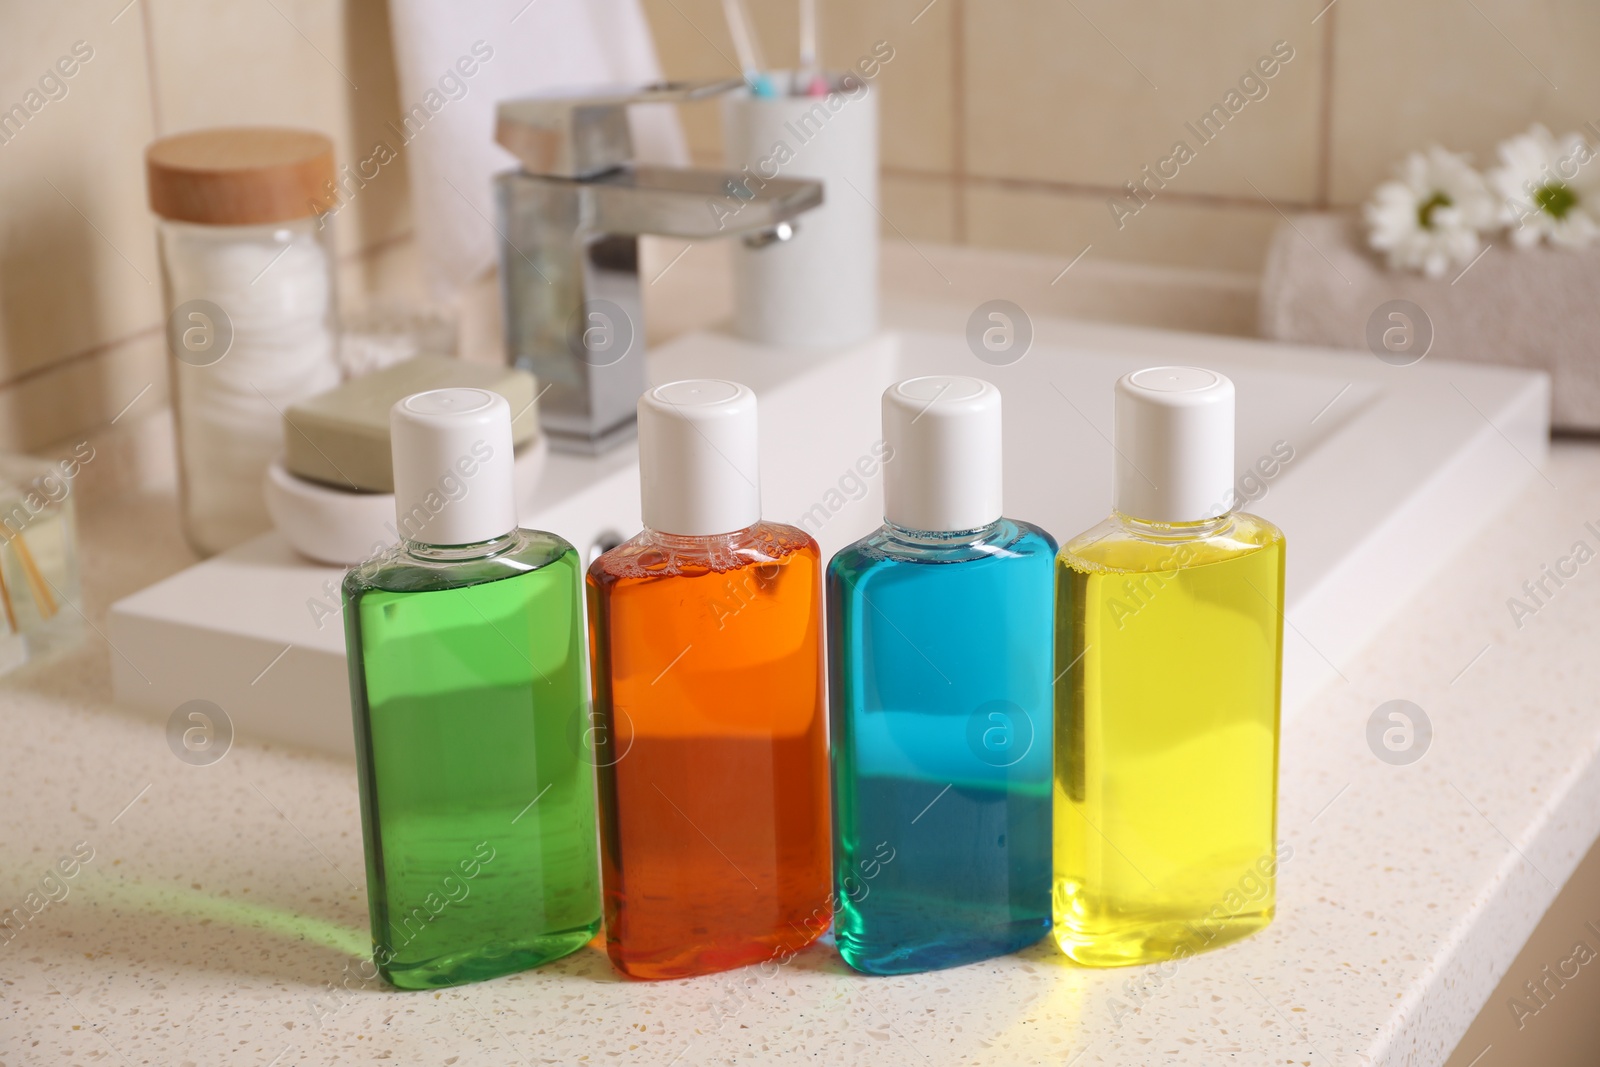 Photo of Fresh mouthwashes in bottles on countertop near sink, closeup